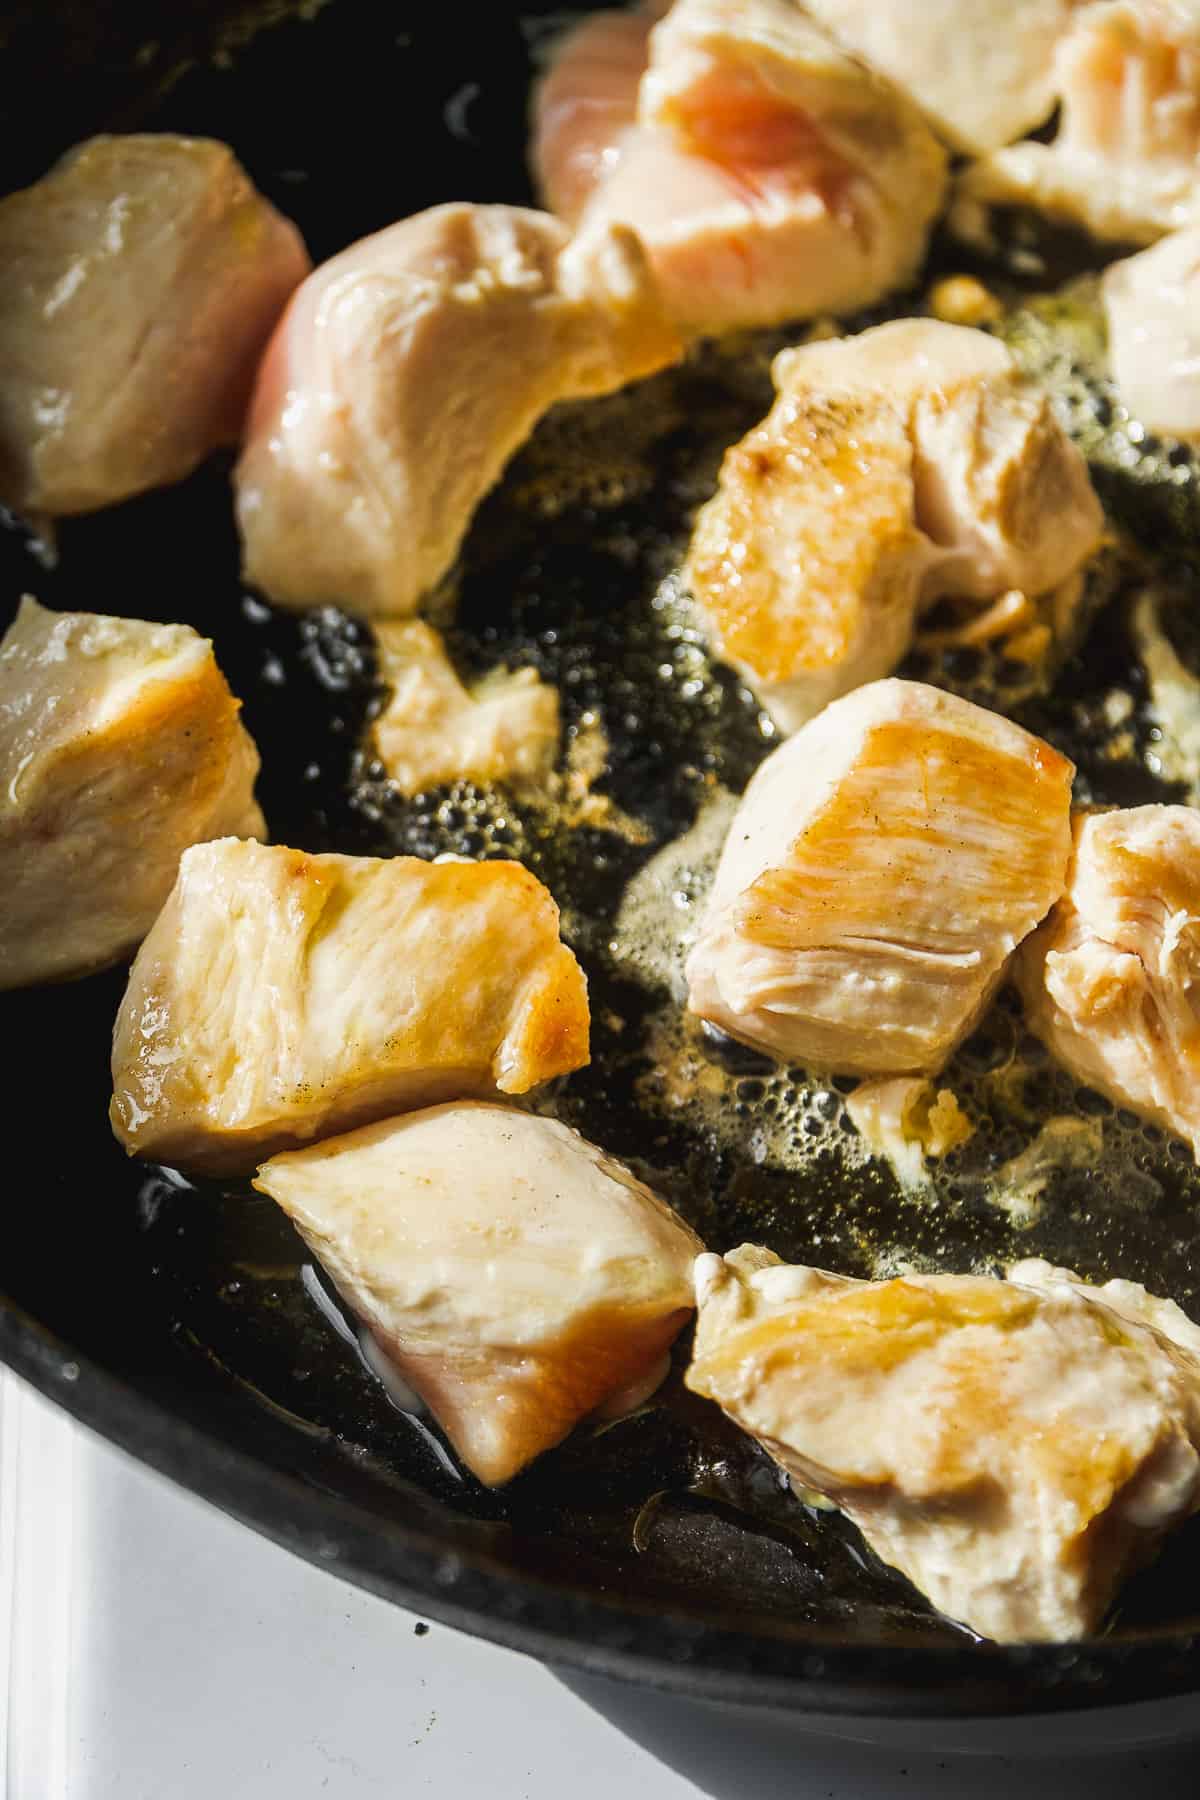 Chicken breast cut into pieces cooked in a black skillet.